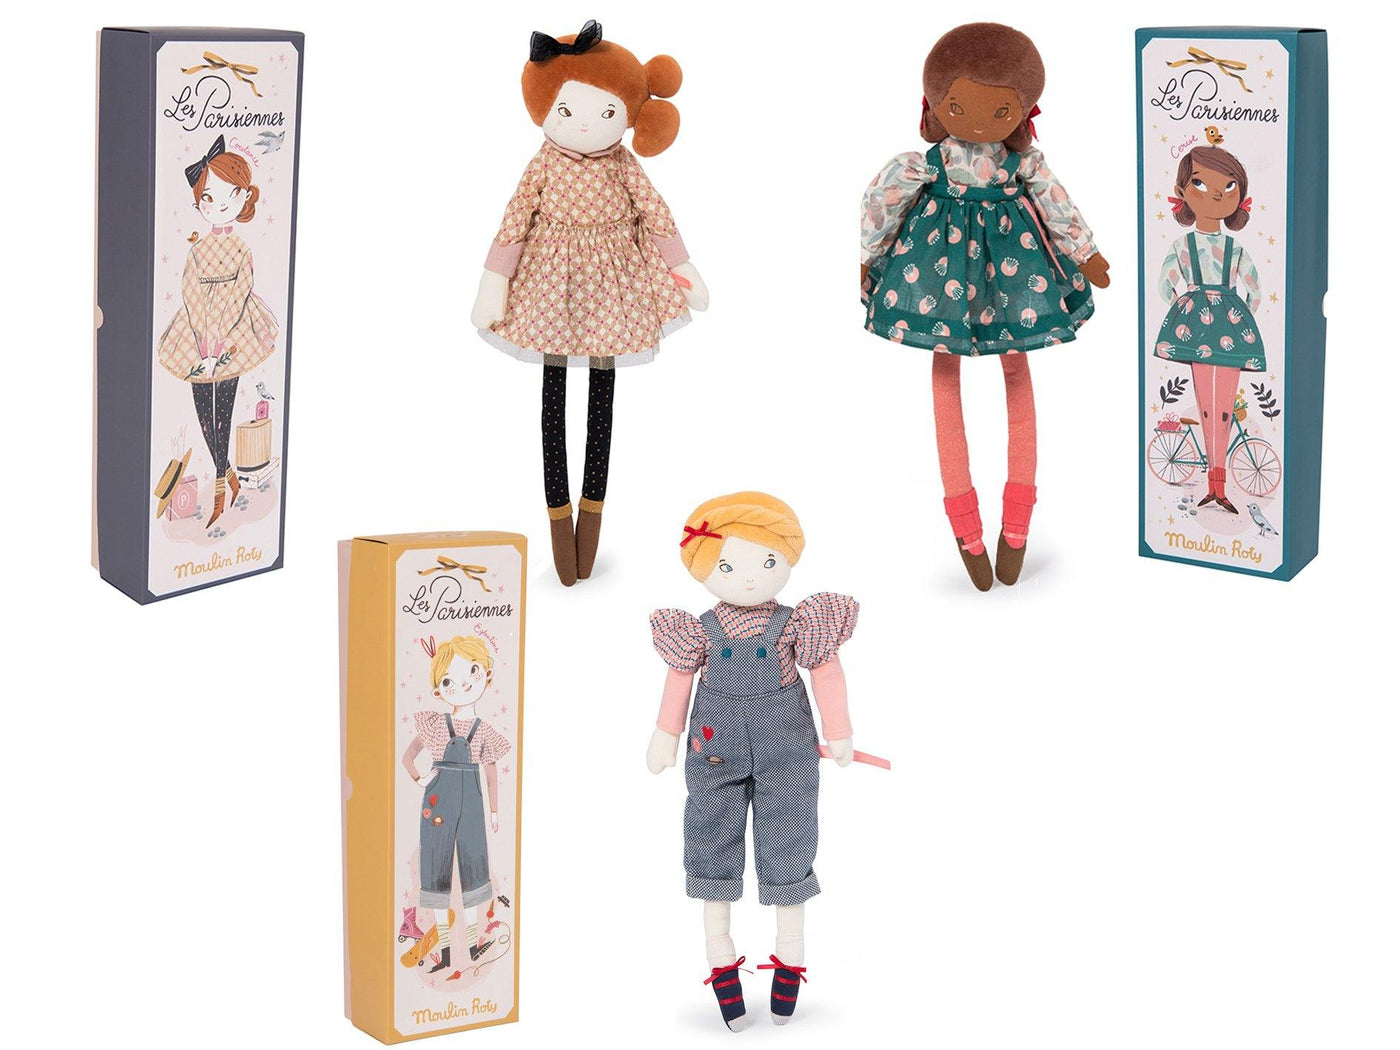 moulin roty dolls - les parisiennes - new 2020